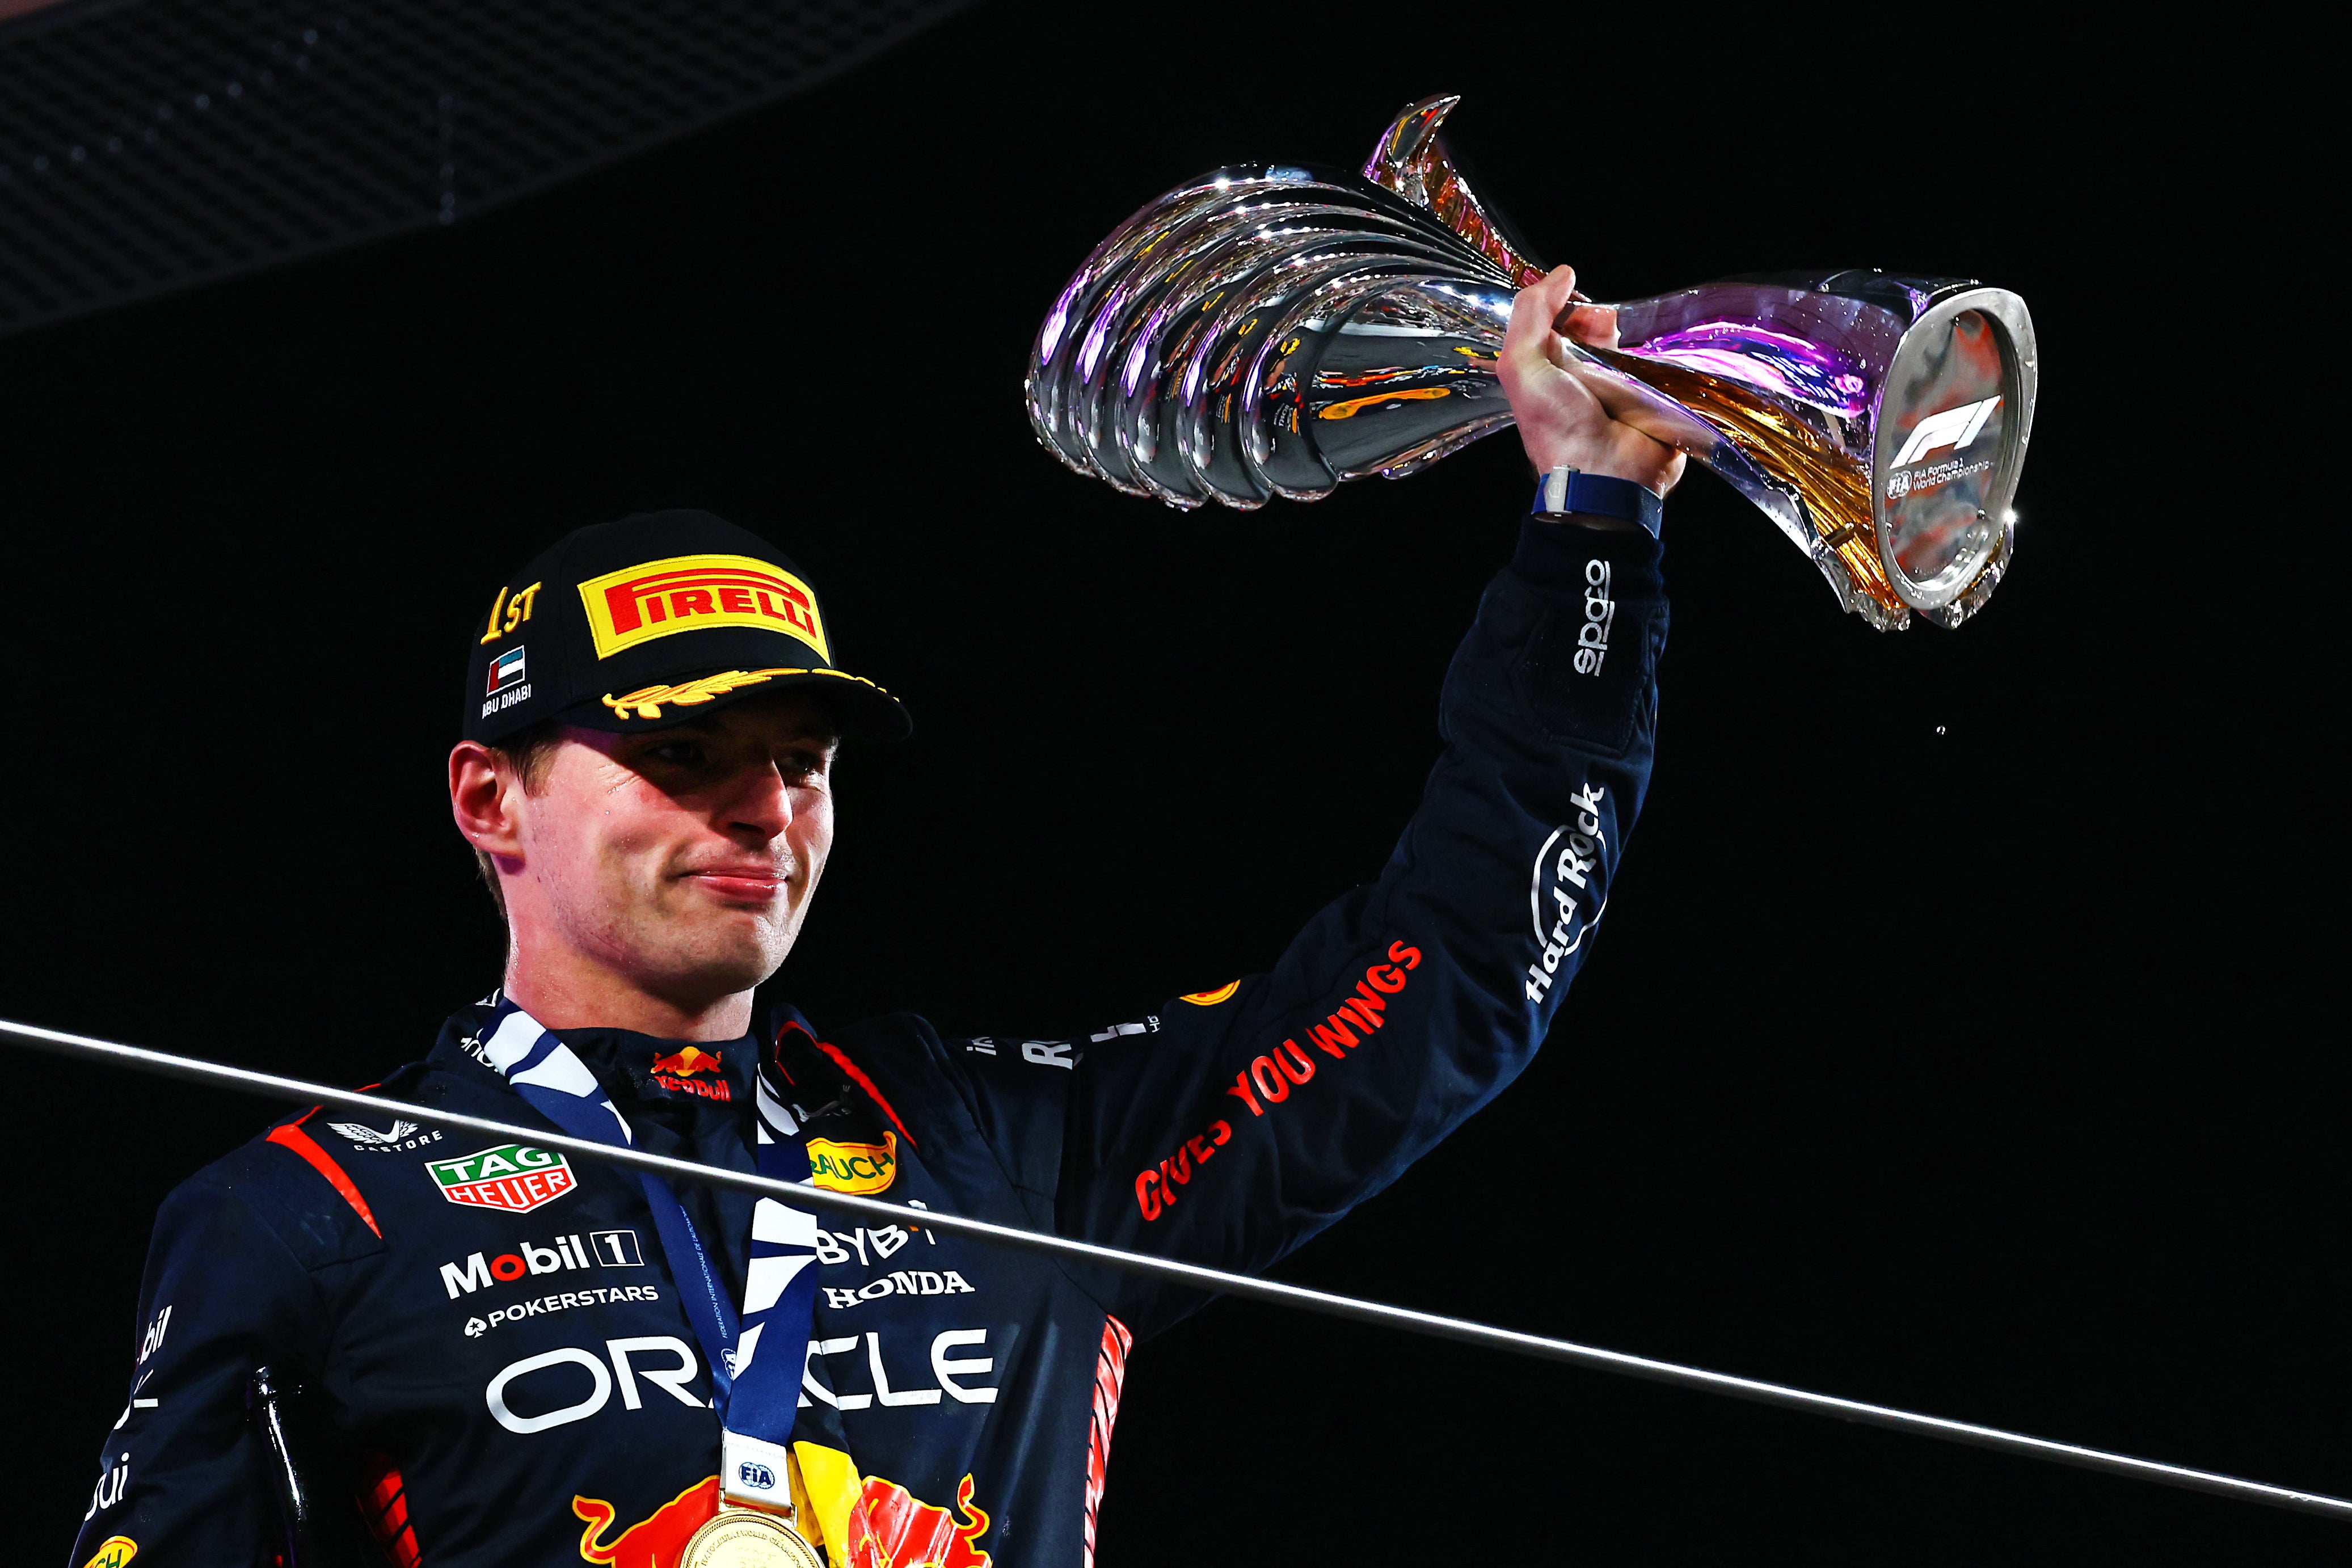 Verstappen claimed his 19th win of the season and became the first man to lead for 1,000 laps in a season